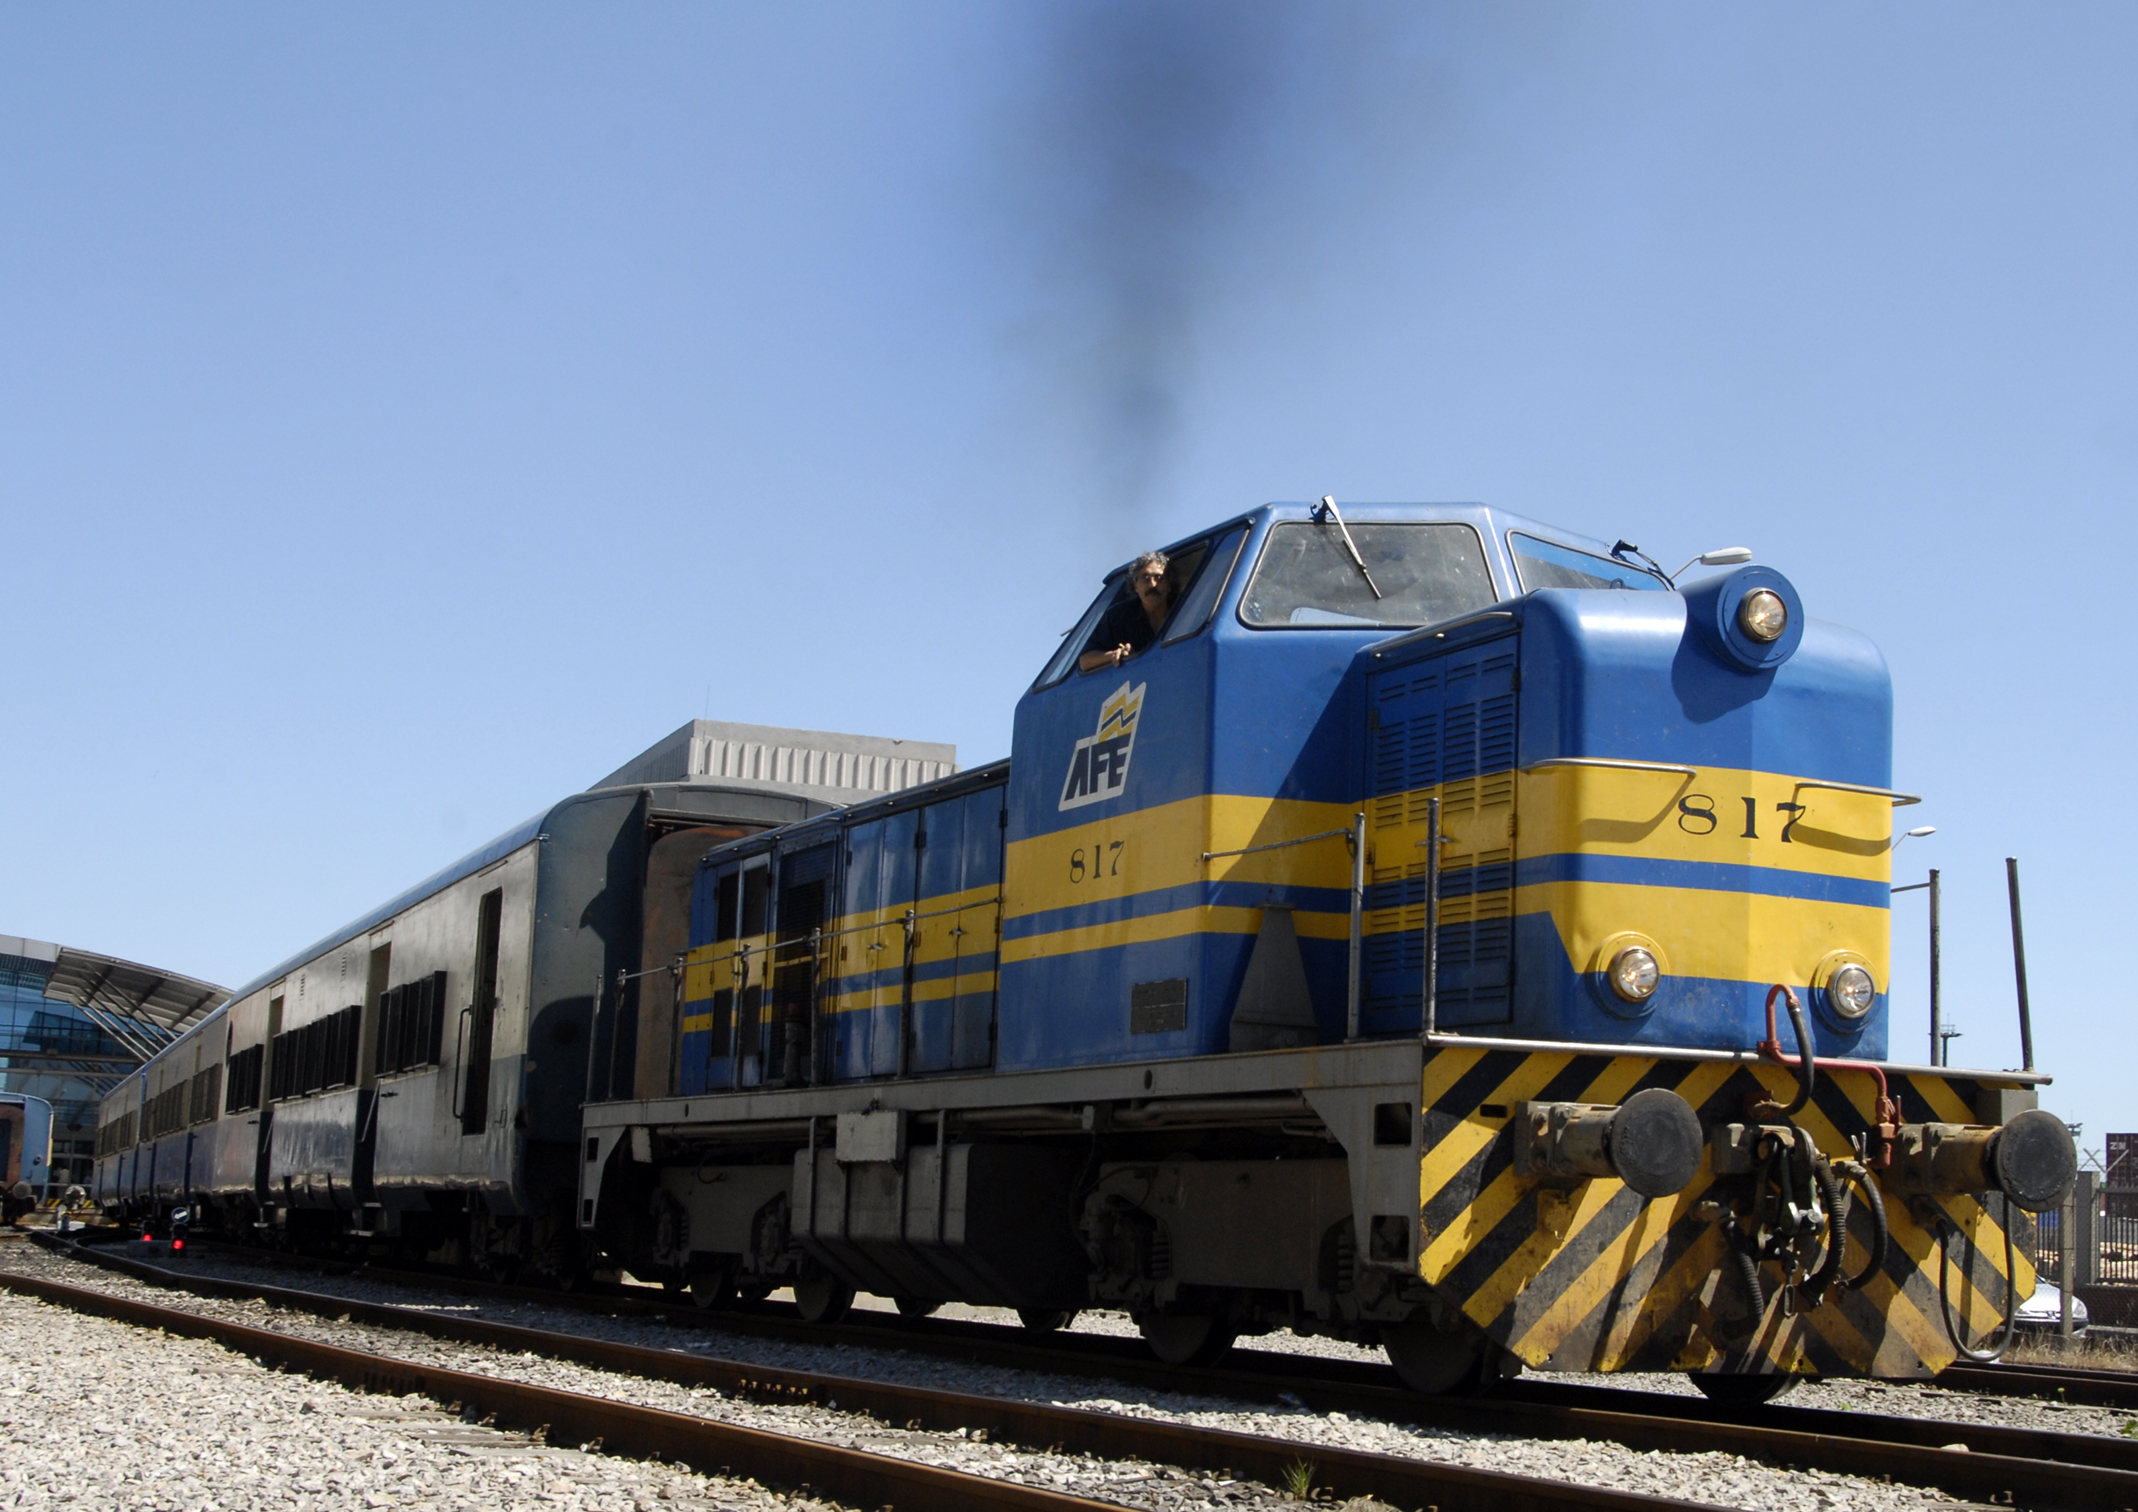 In 1952, AFE was created, the entity that received 2,950 kilometers of tracks for its administration.